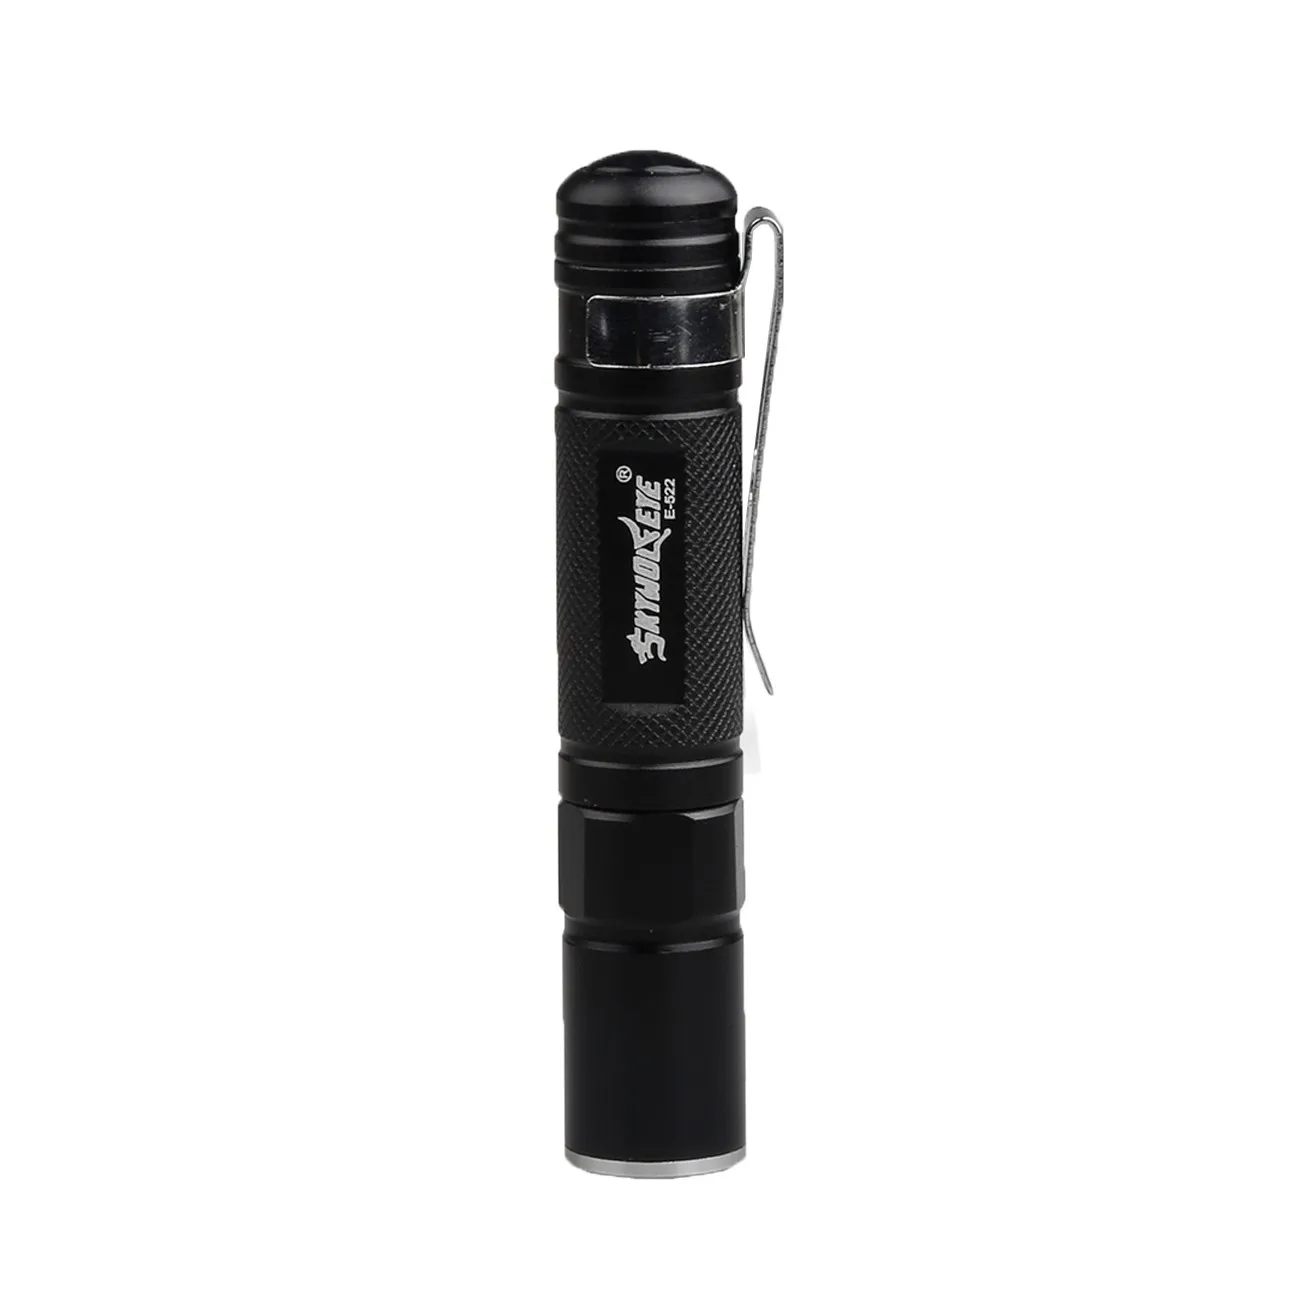 Top Super Mini 3000lm Zoomable Cree Q5 Led Flashlight 3 Mode Torch Super Bright Light Lamp Outdoor Bicycle Accessories #N 9